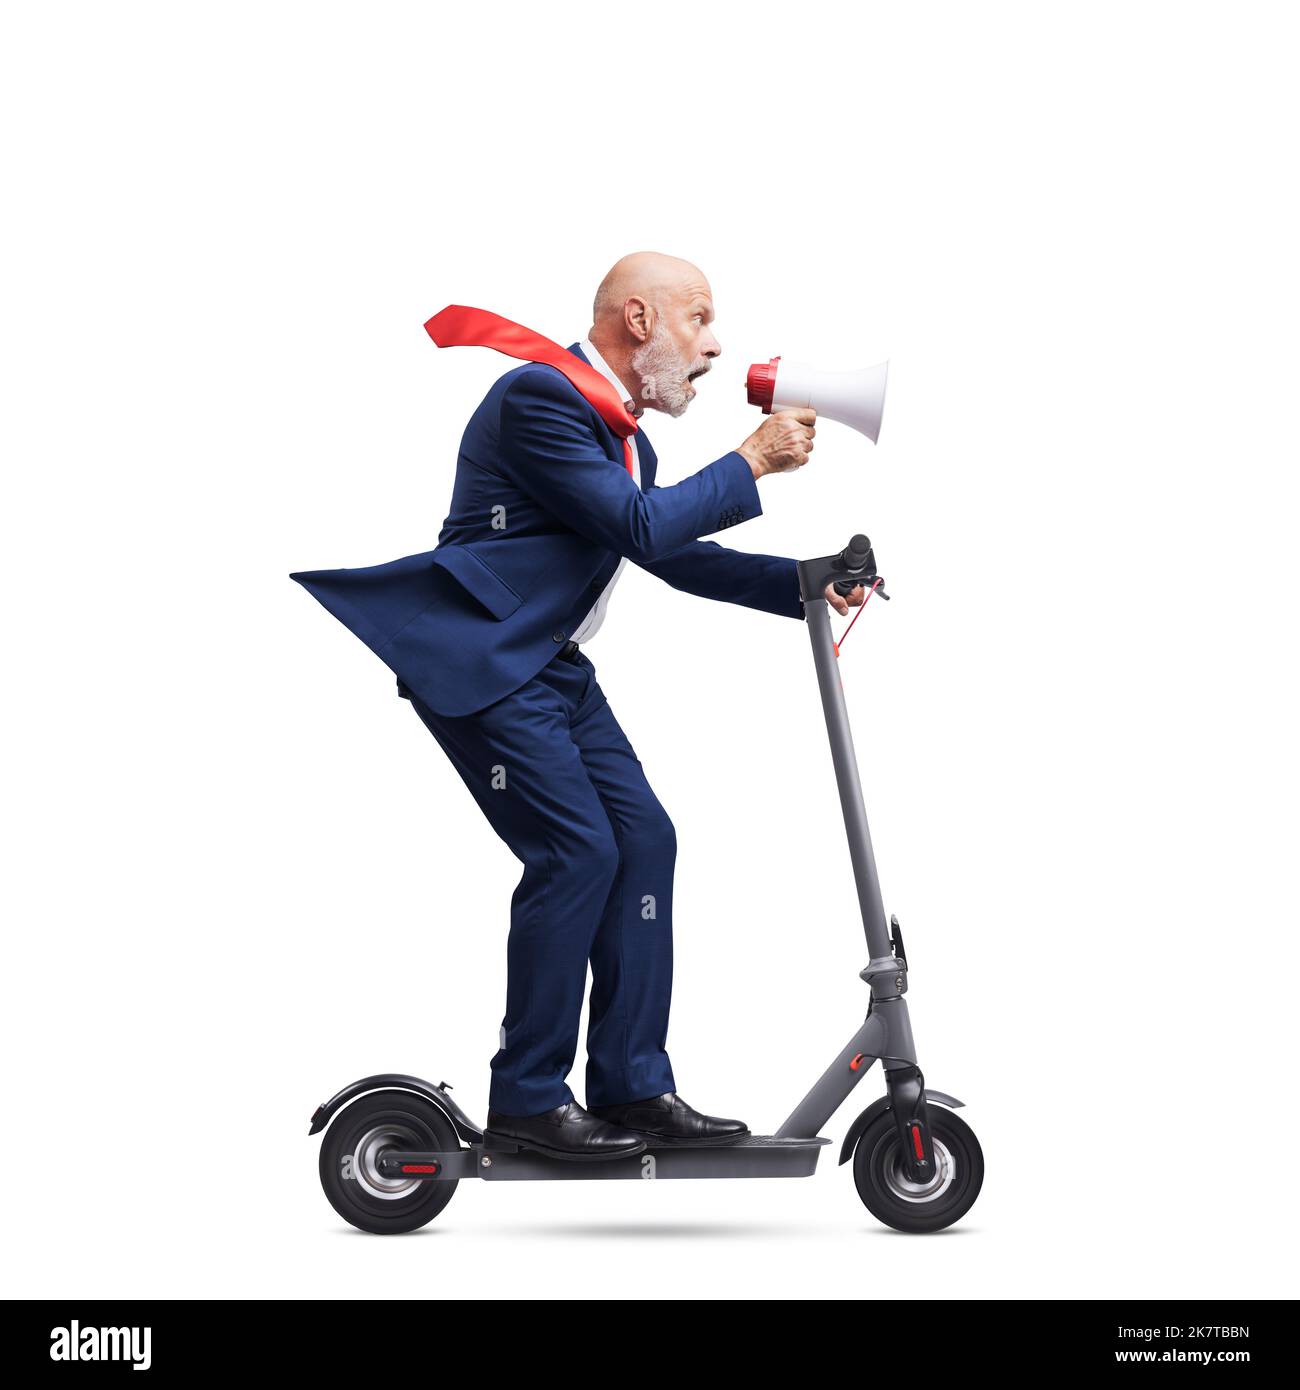 Business executive shouting through a megaphone and riding an electric scooter, isolated on white background Stock Photo